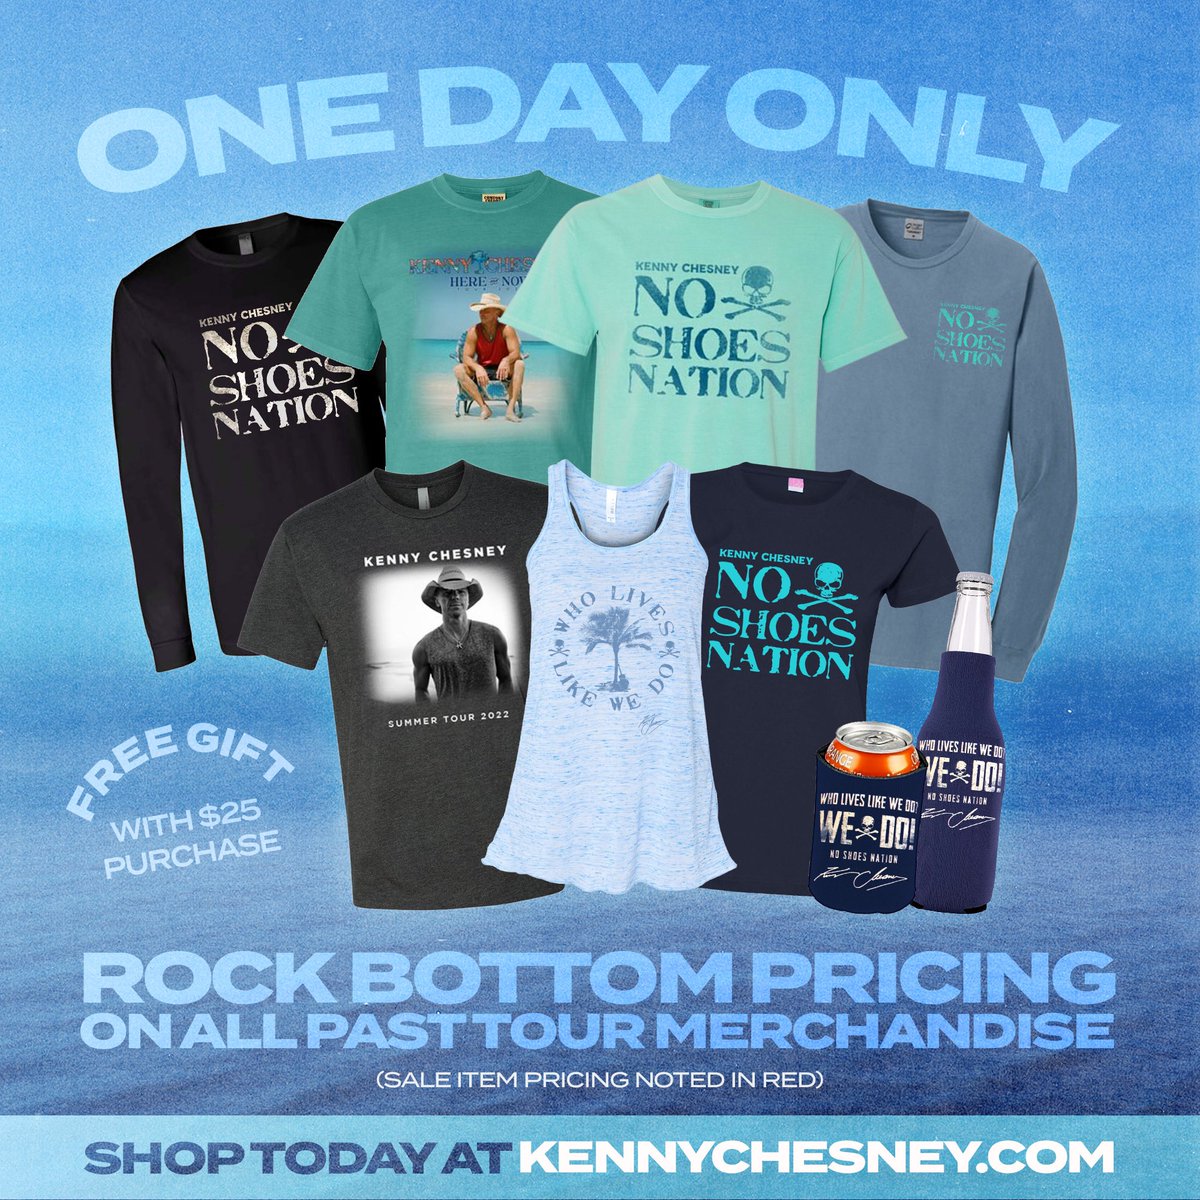 Tour merch is on SALE for 24 hours only! Ends March 26th at Midnight ET. Spend $25+ and get a FREE gift! (While supplies last.) Shop now at store.kennychesney.com